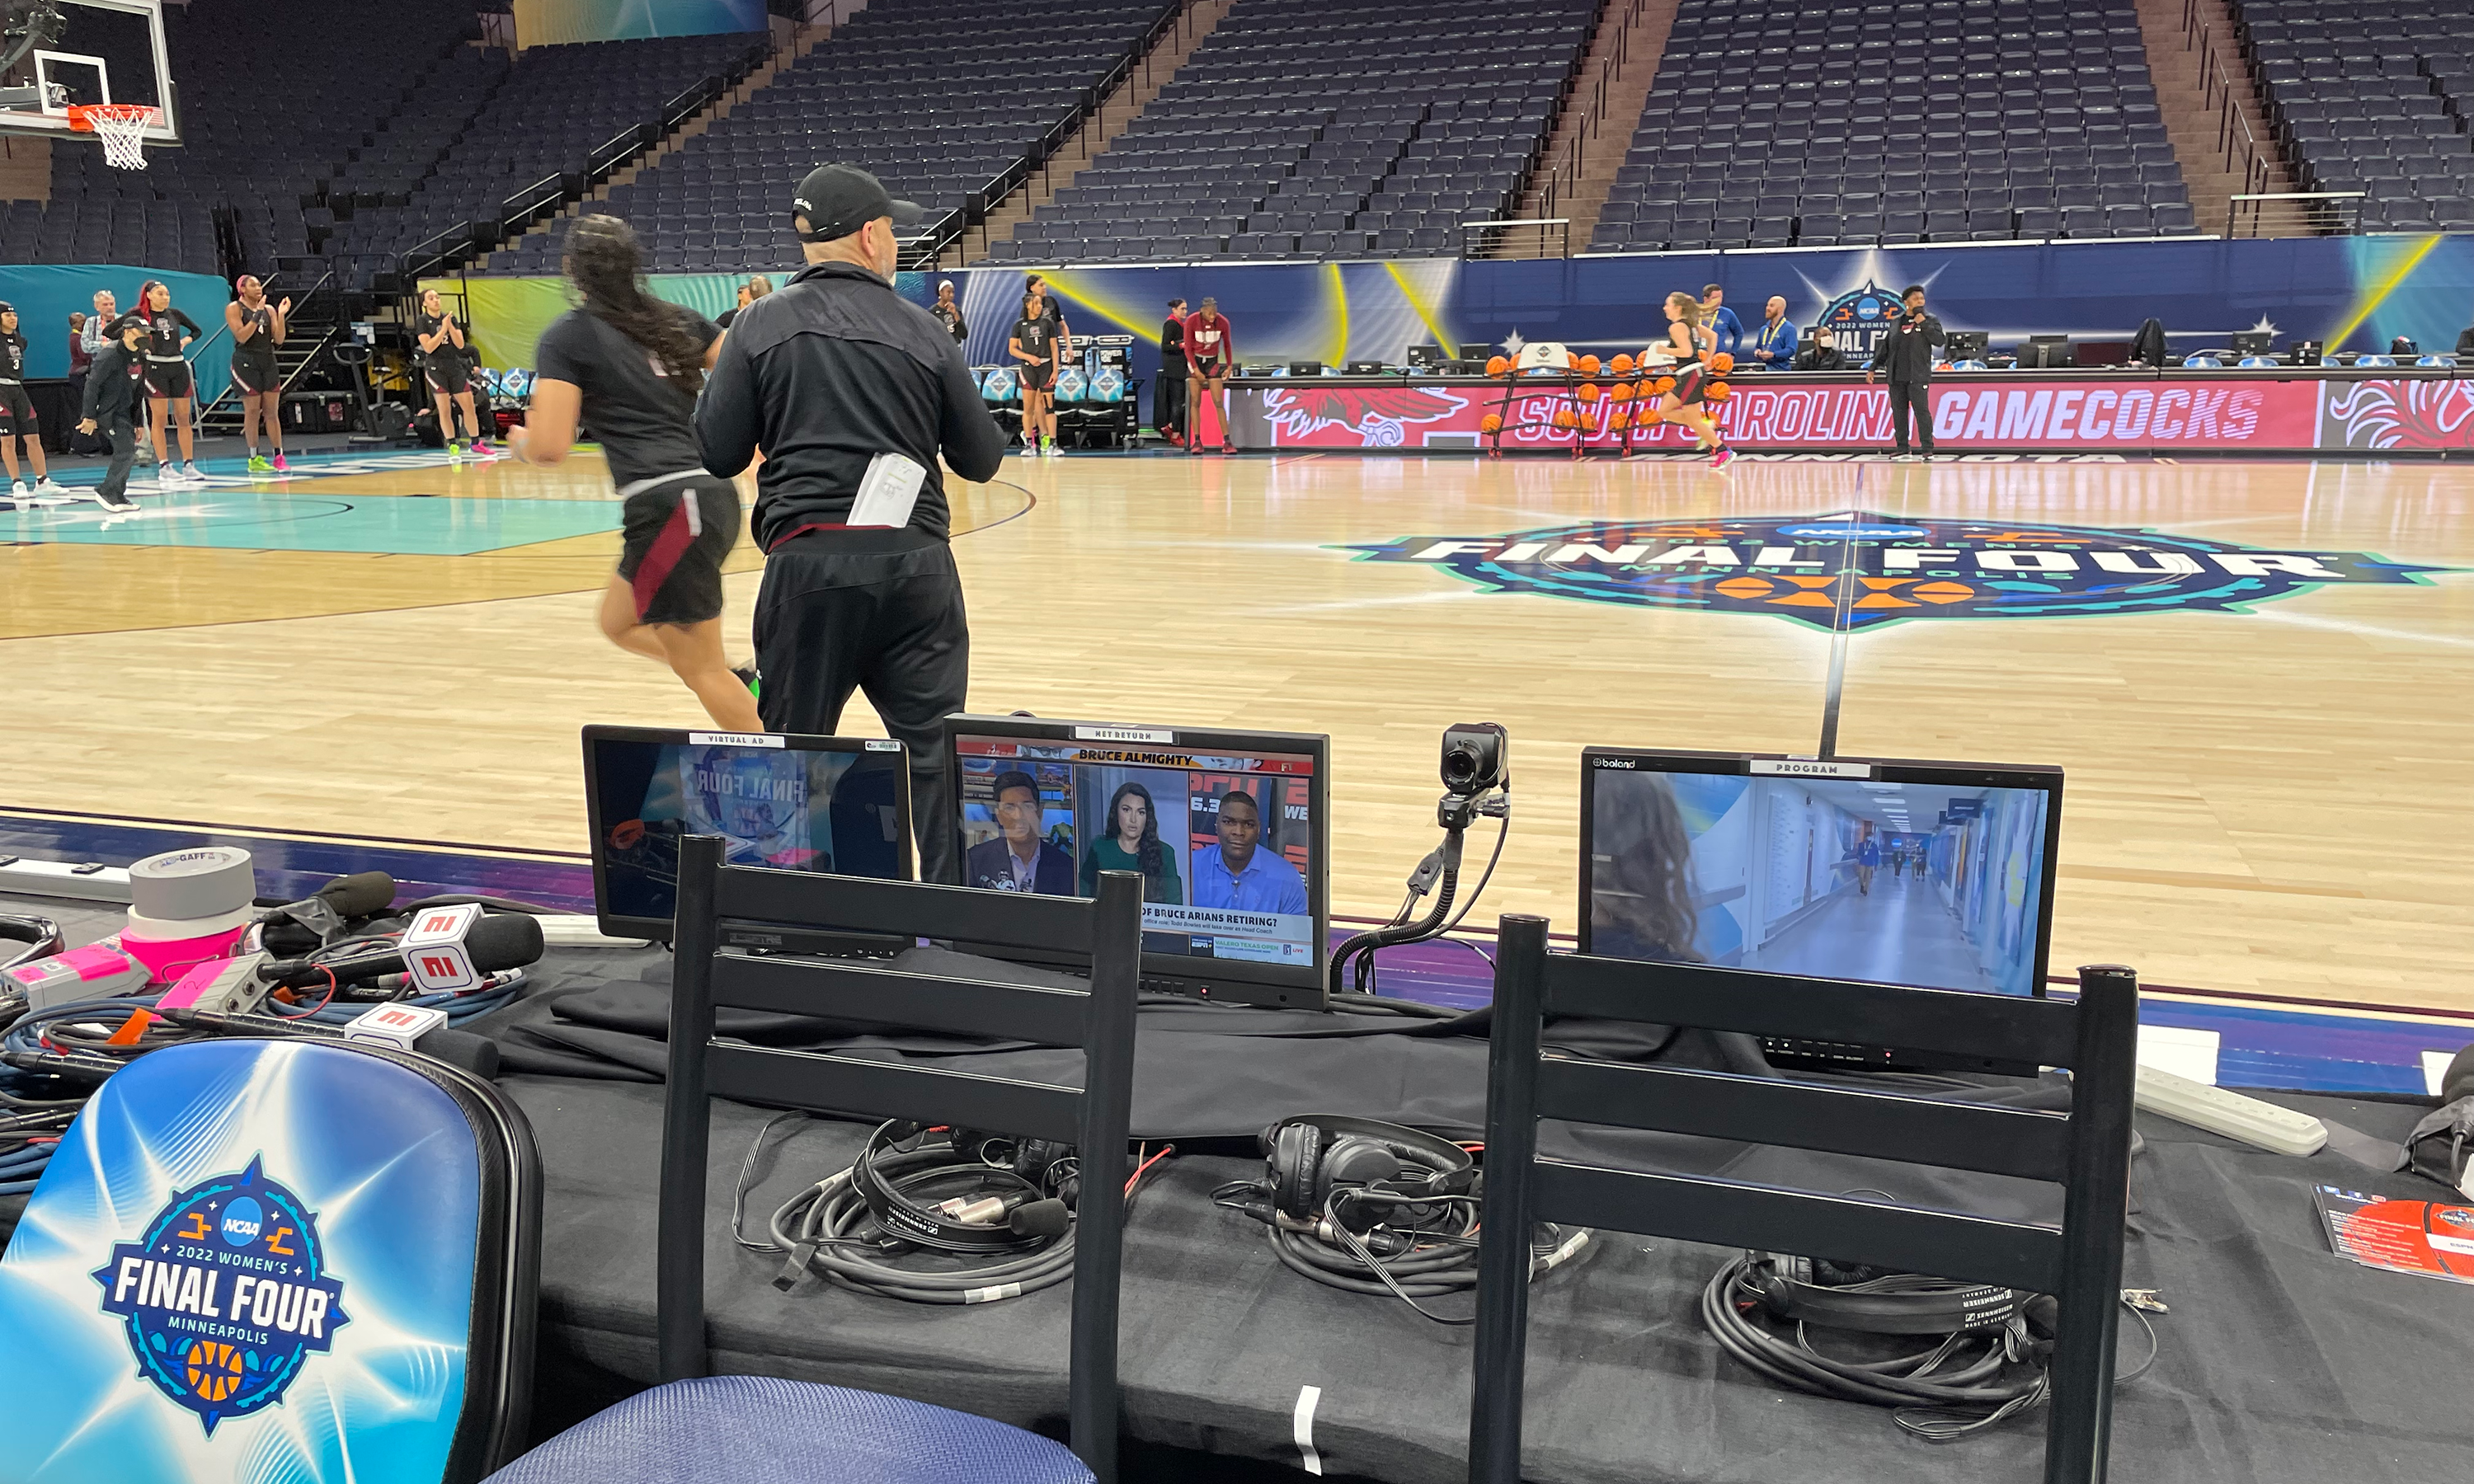 Live From Womens Final Four Slimmer RailCam, Debut of SupraCam, Sony 5500 Bring Fresh Visuals to ESPNs Biggest NCAA Womens Hoops Championship